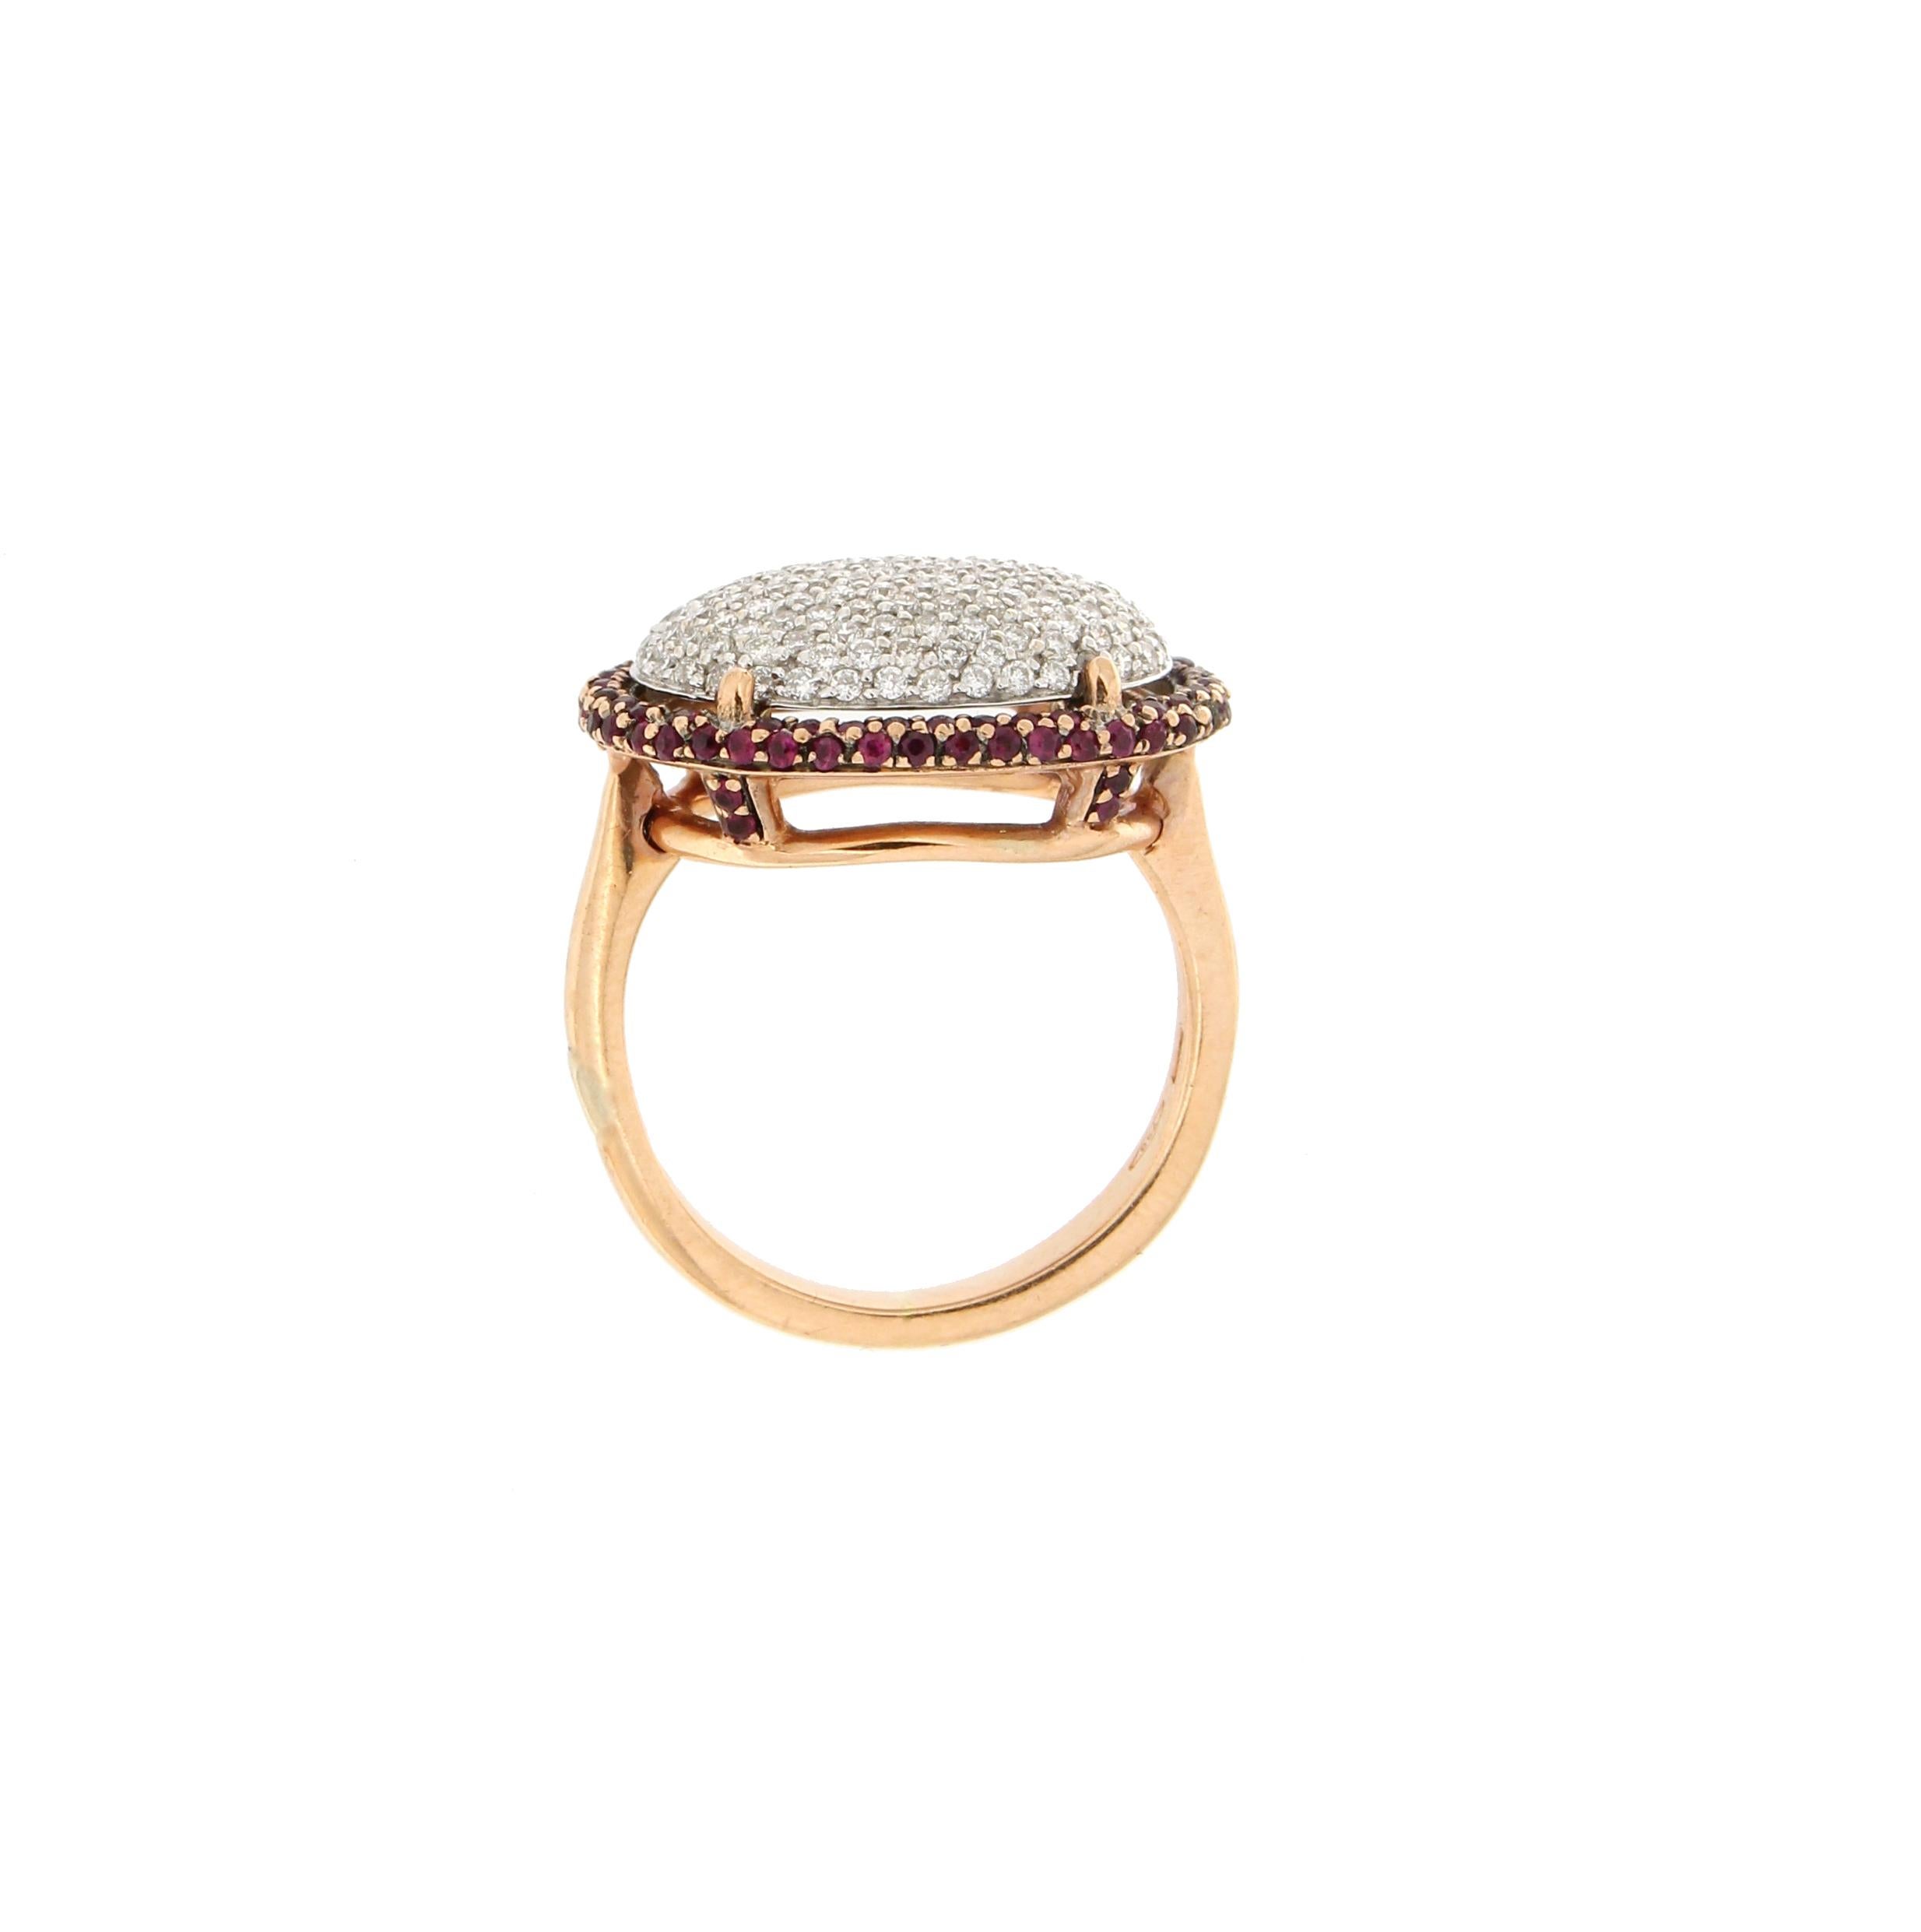 Brilliant Cut Handcraft Rubies 18 Karat White and Yellow Gold Diamonds Cocktail Ring For Sale